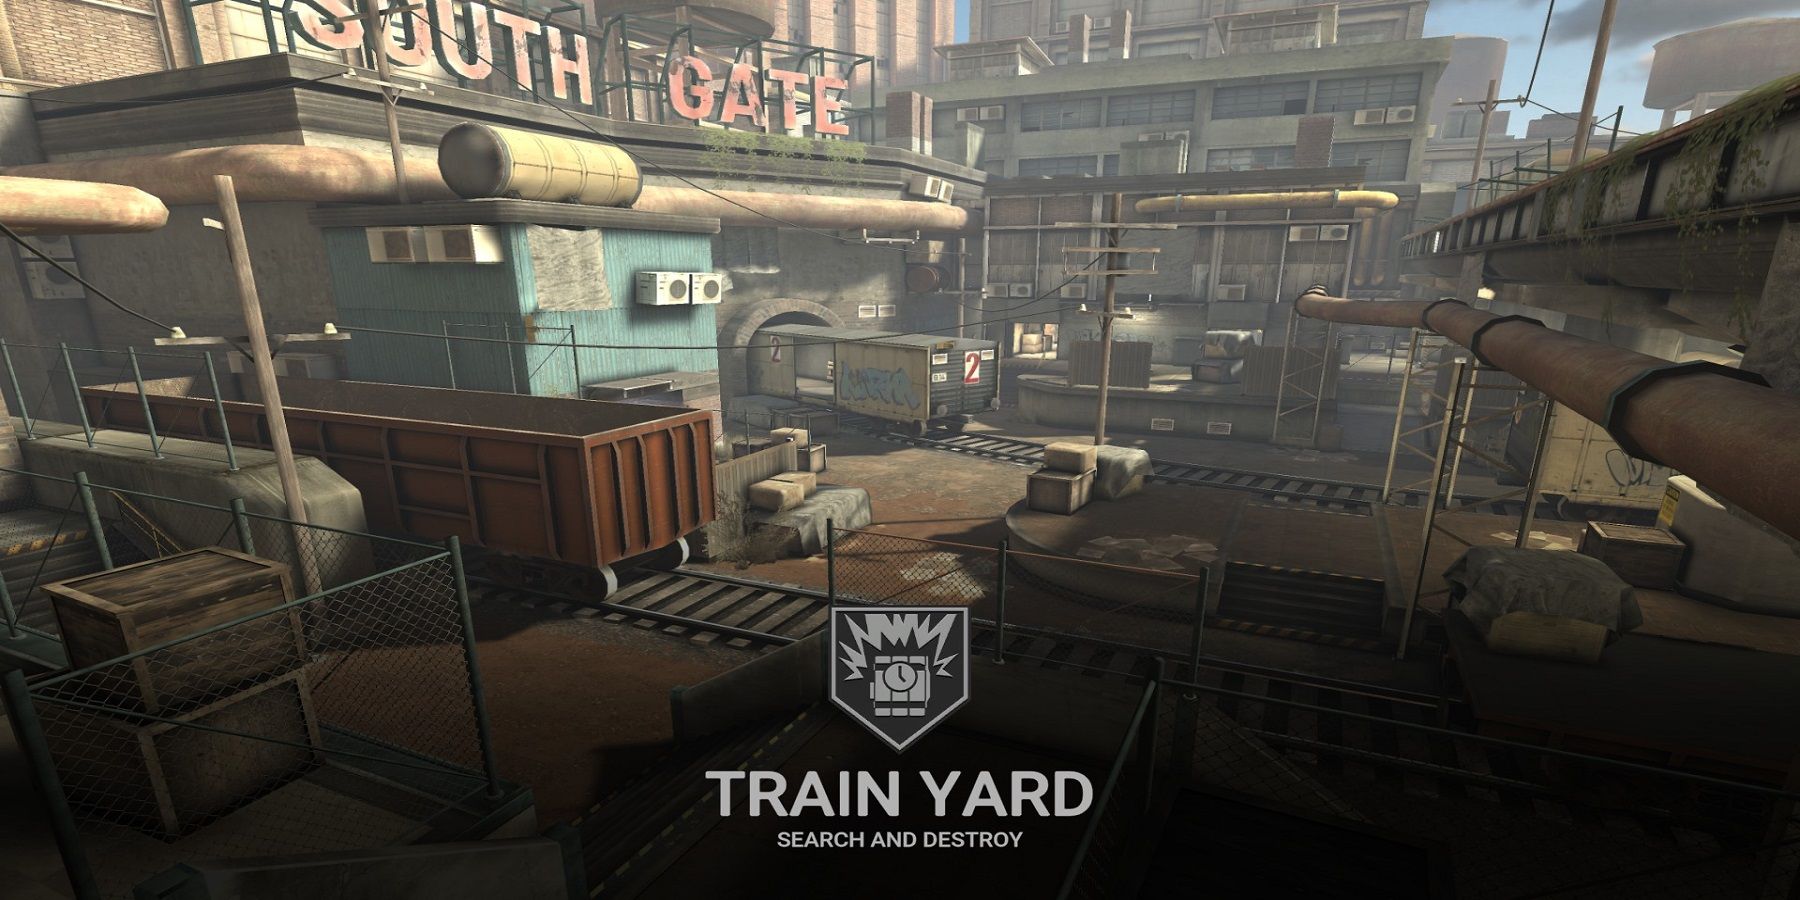 The Train Yard map from Combat Master.